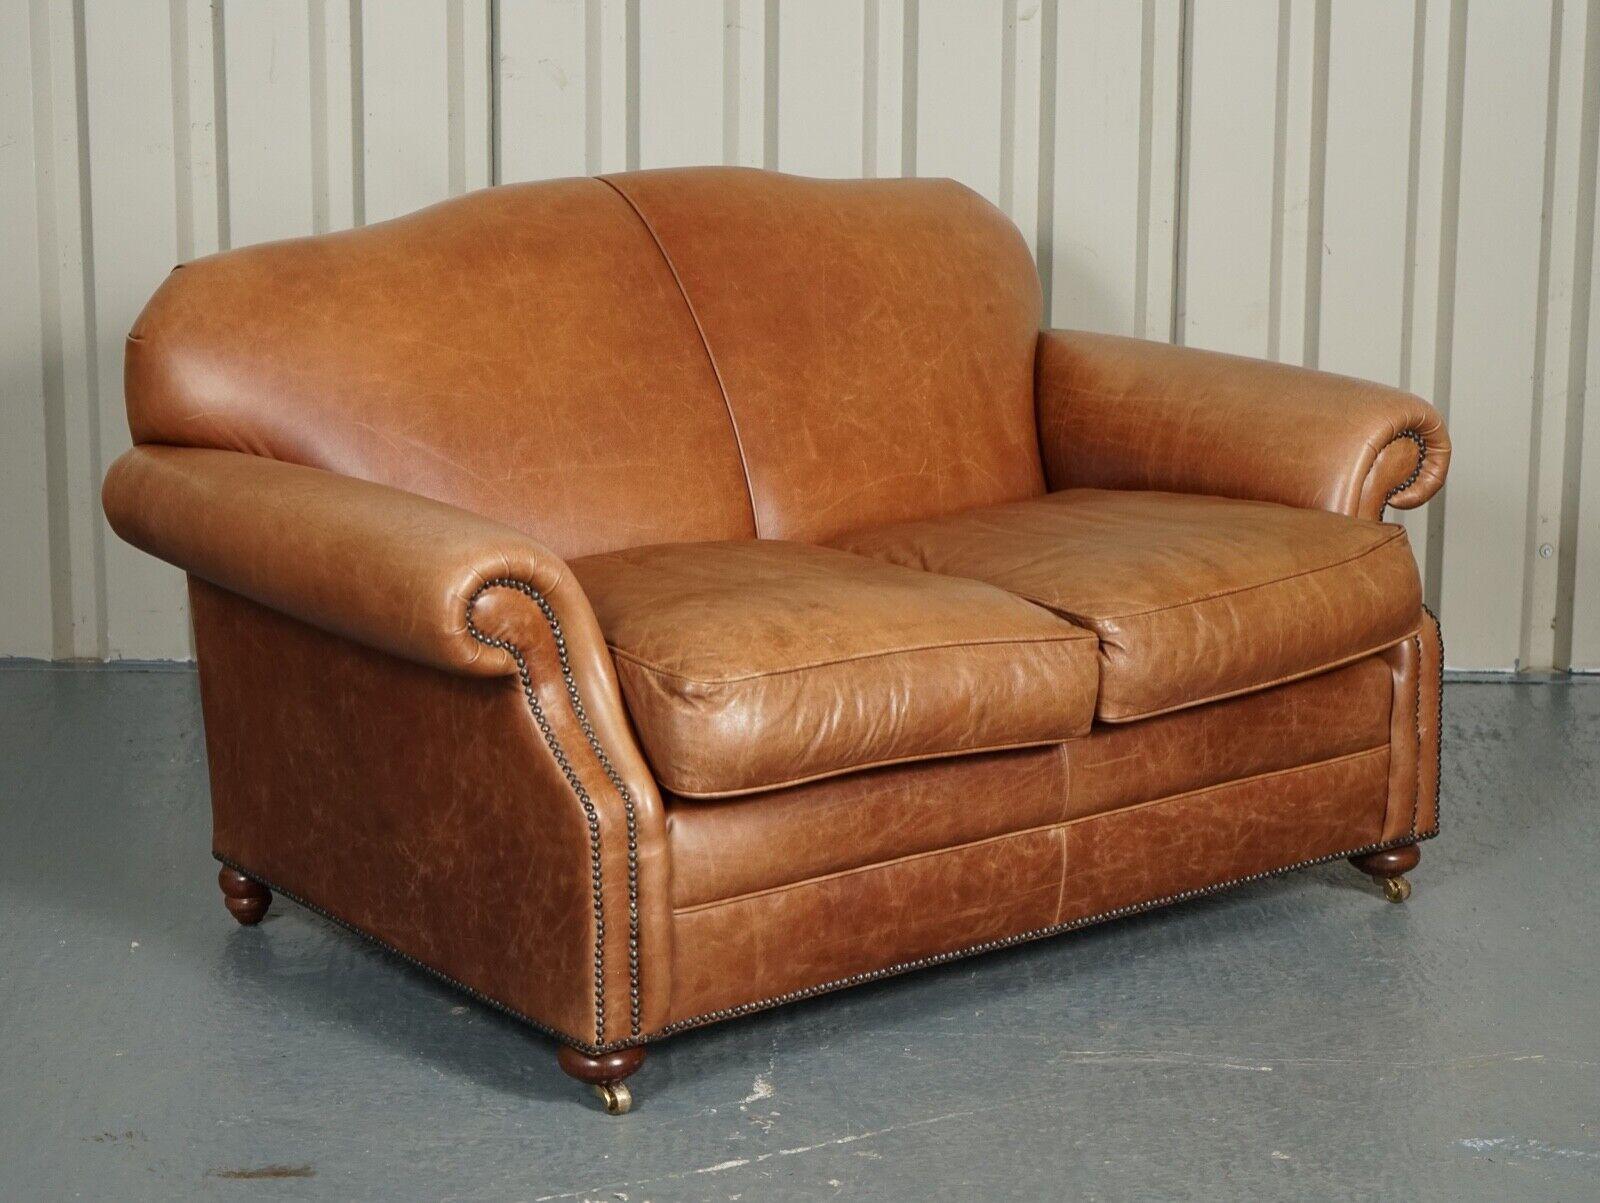 British Vintage Brown Leather 2 to 3 Seater Sofa by Laura Ashley